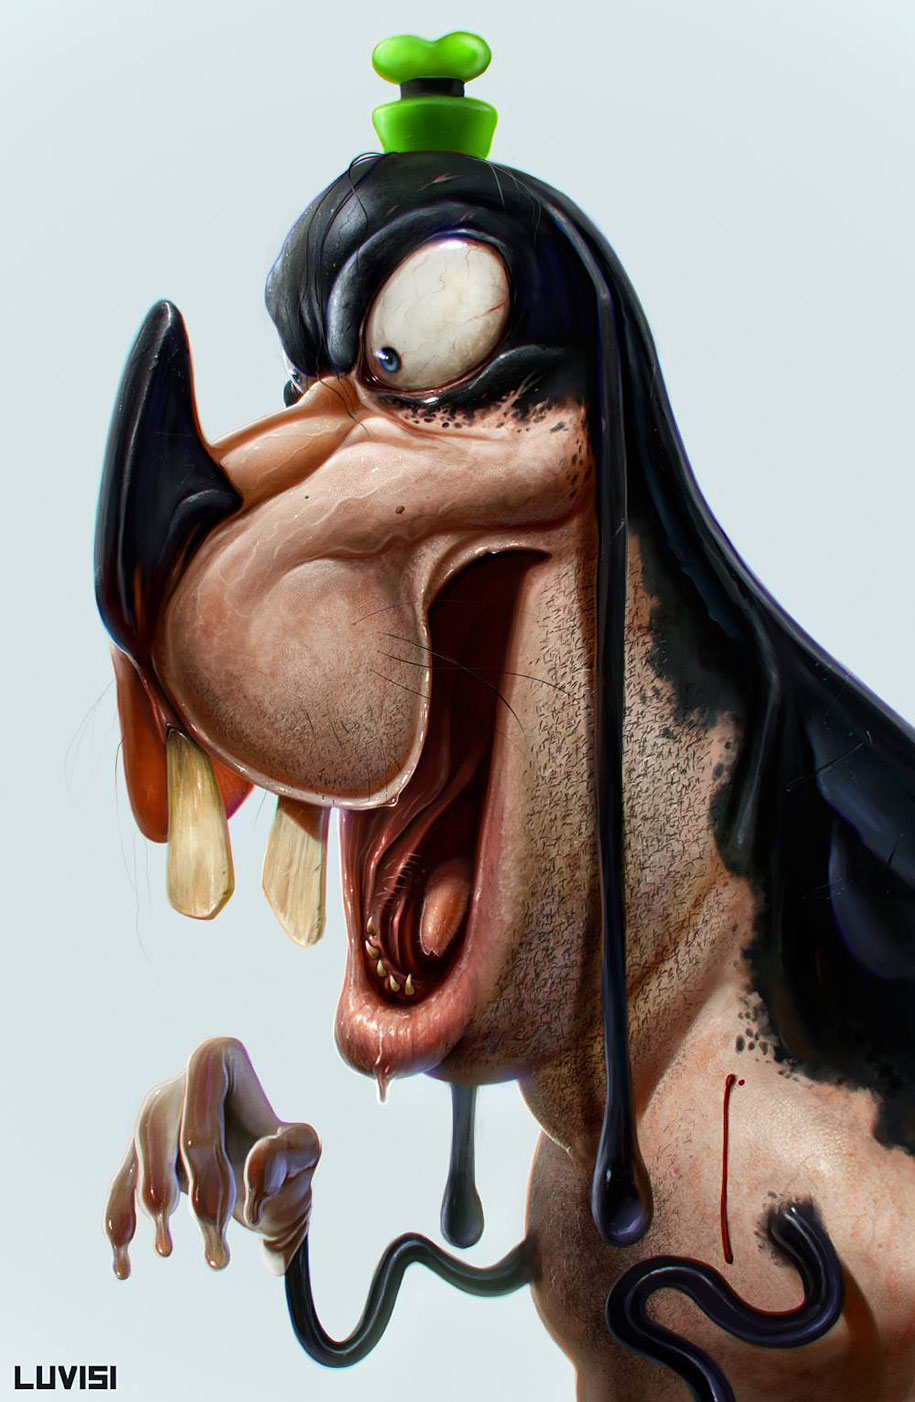 Childhood Cartoon Characters Turned into Crazy Killers -DesignBump